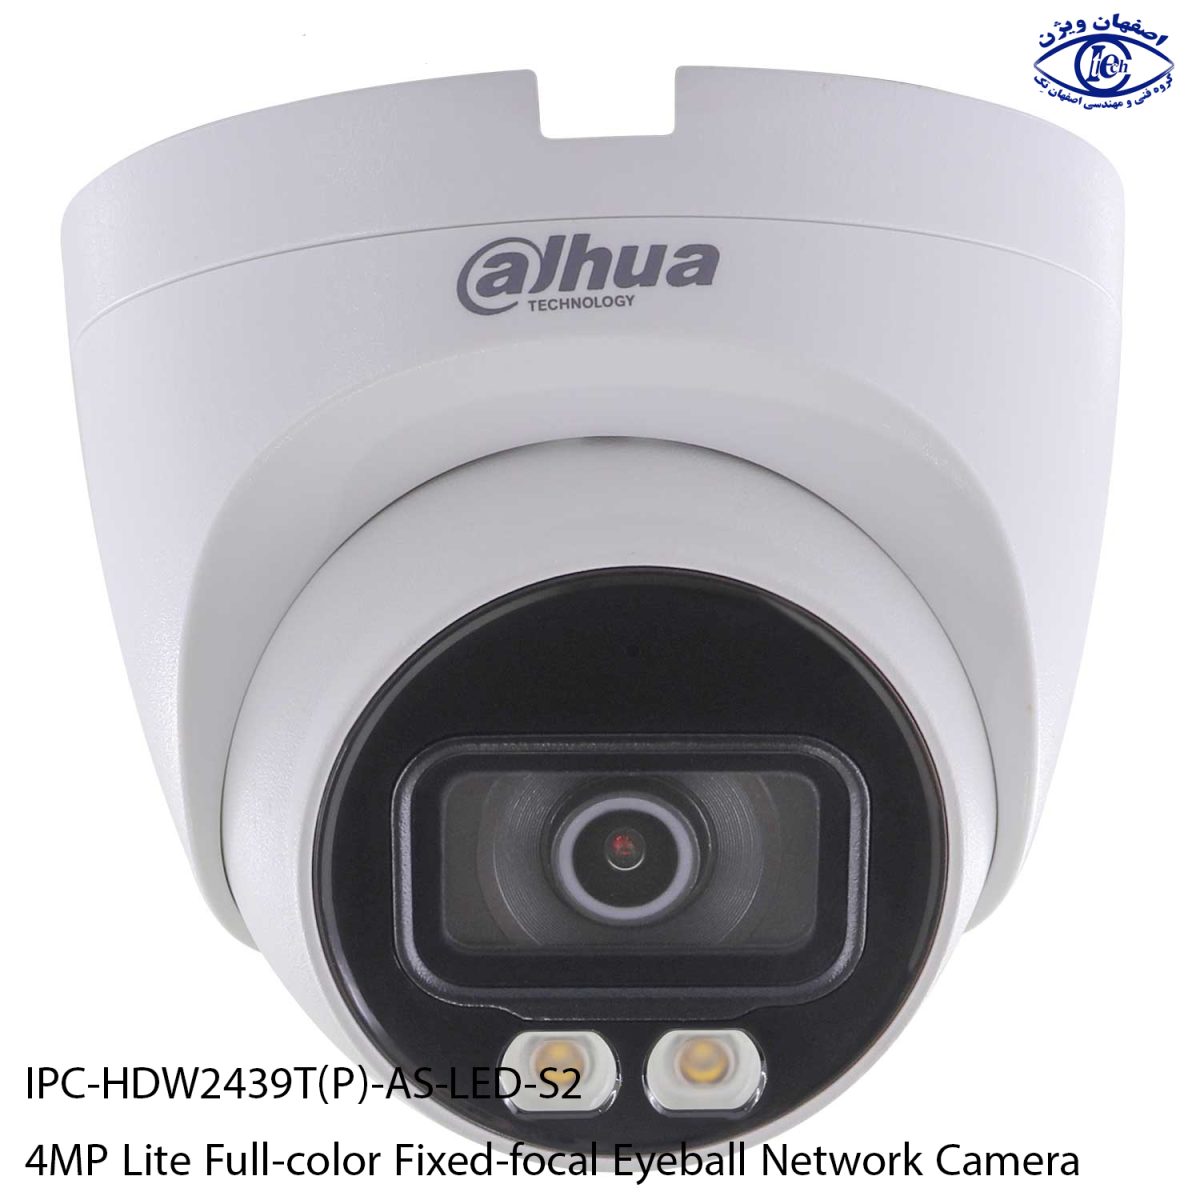 IPC-HDW2439T-AS-LED-S2 4MP Lite Full-color Fixed-focal Eyeball Network Camera